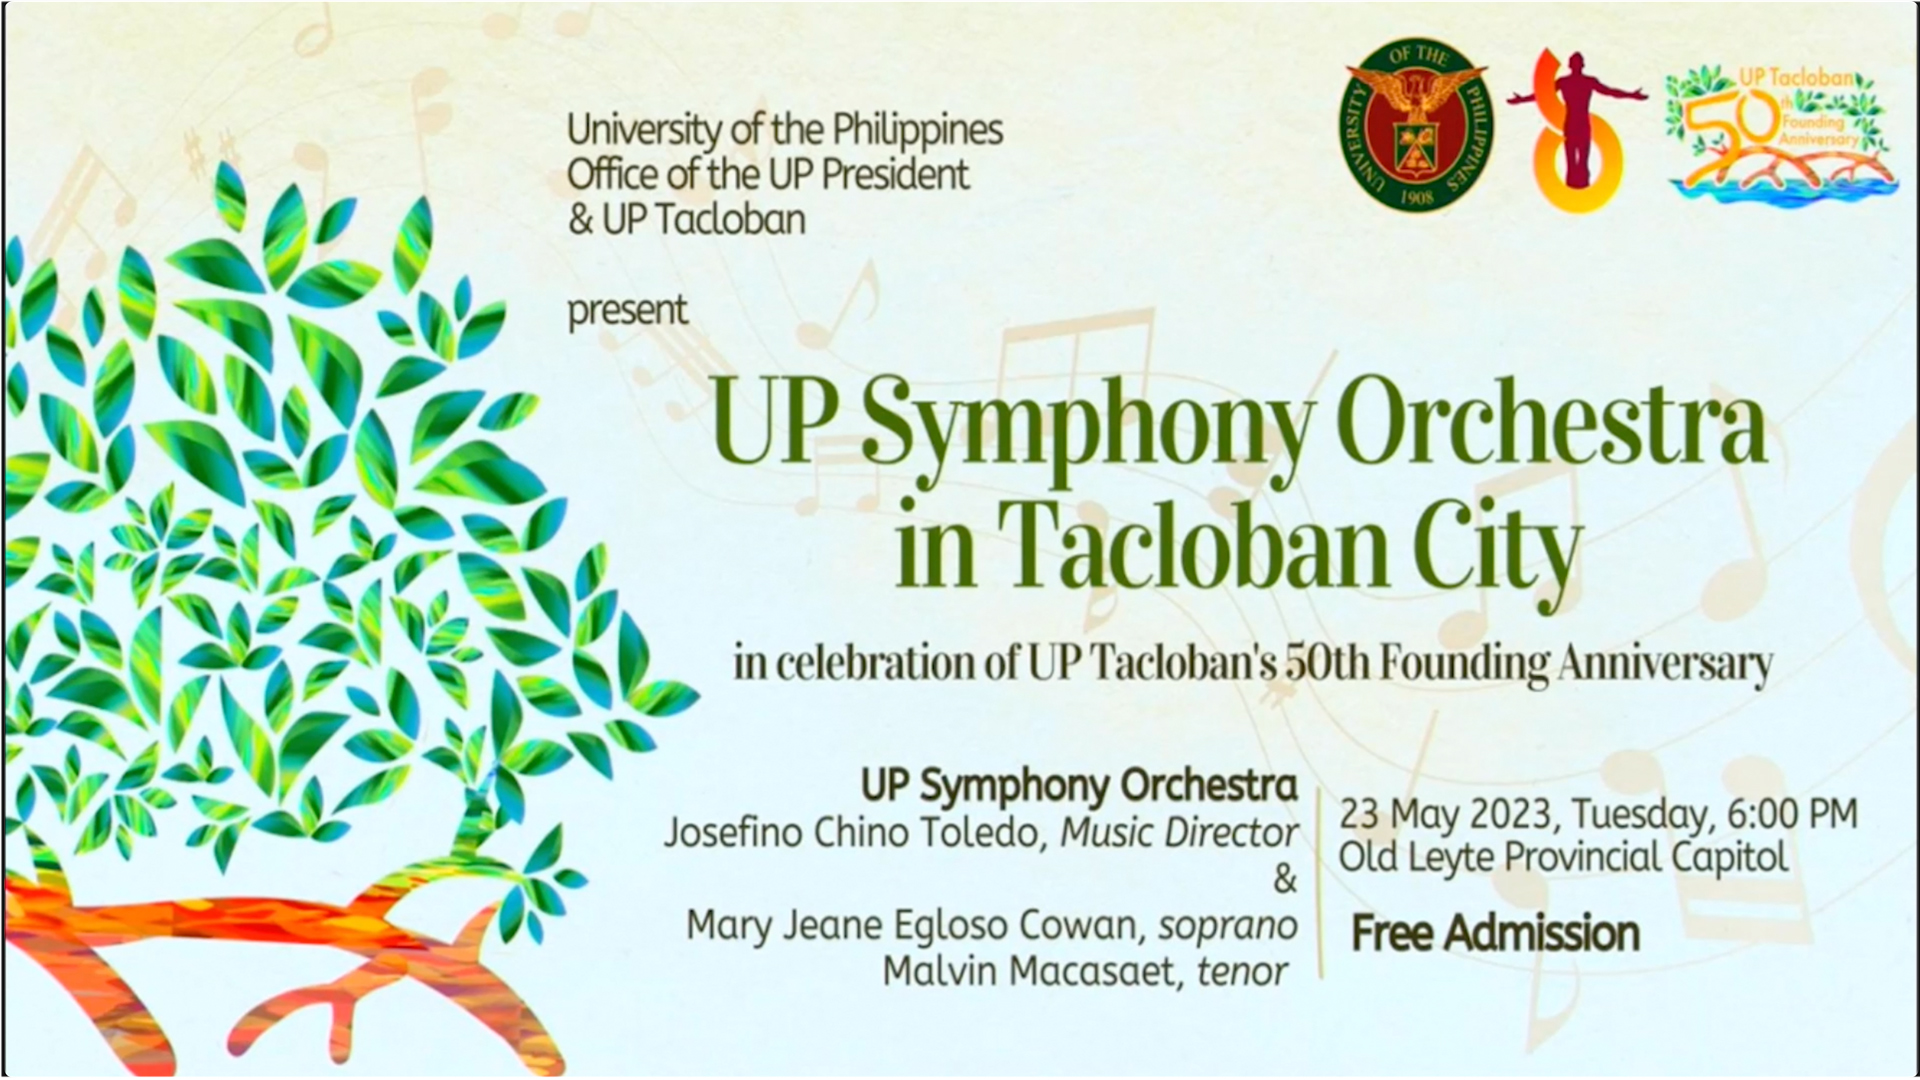 UP Symphony Orchestra in Tacloban City